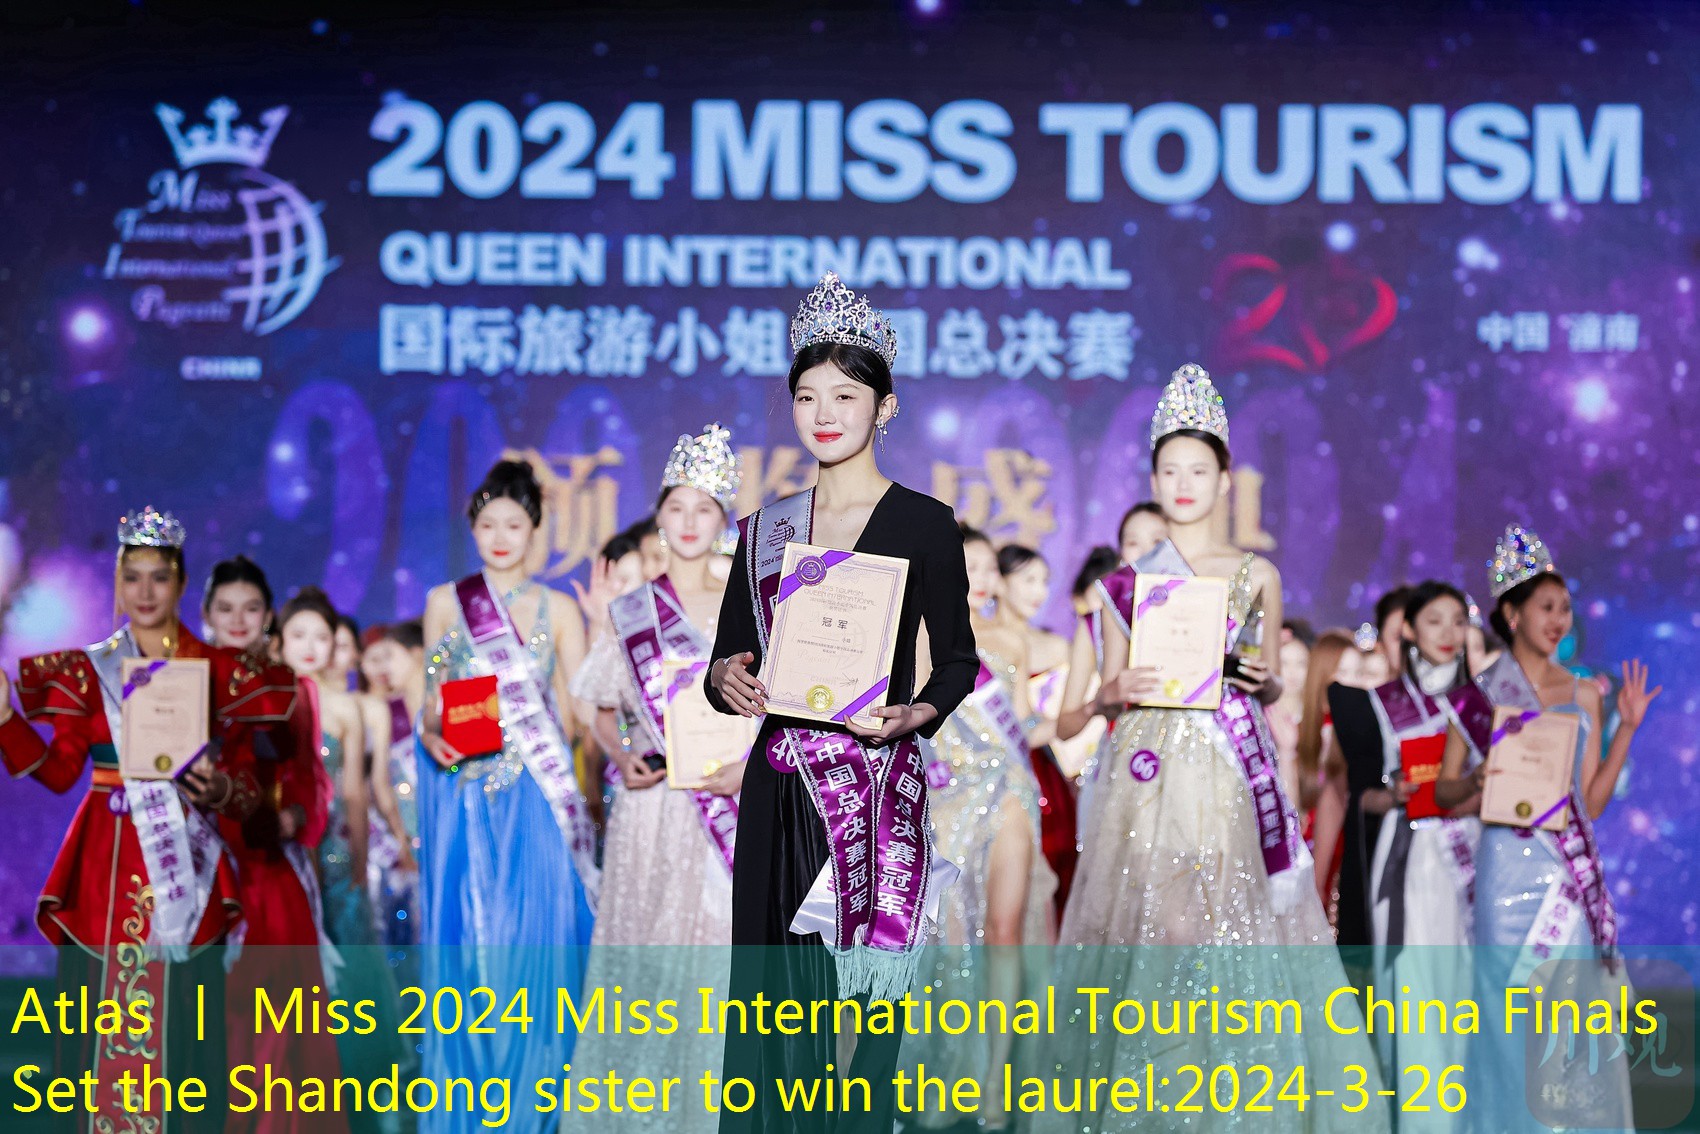 Atlas 丨 Miss 2024 Miss International Tourism China Finals Set the Shandong sister to win the laurel